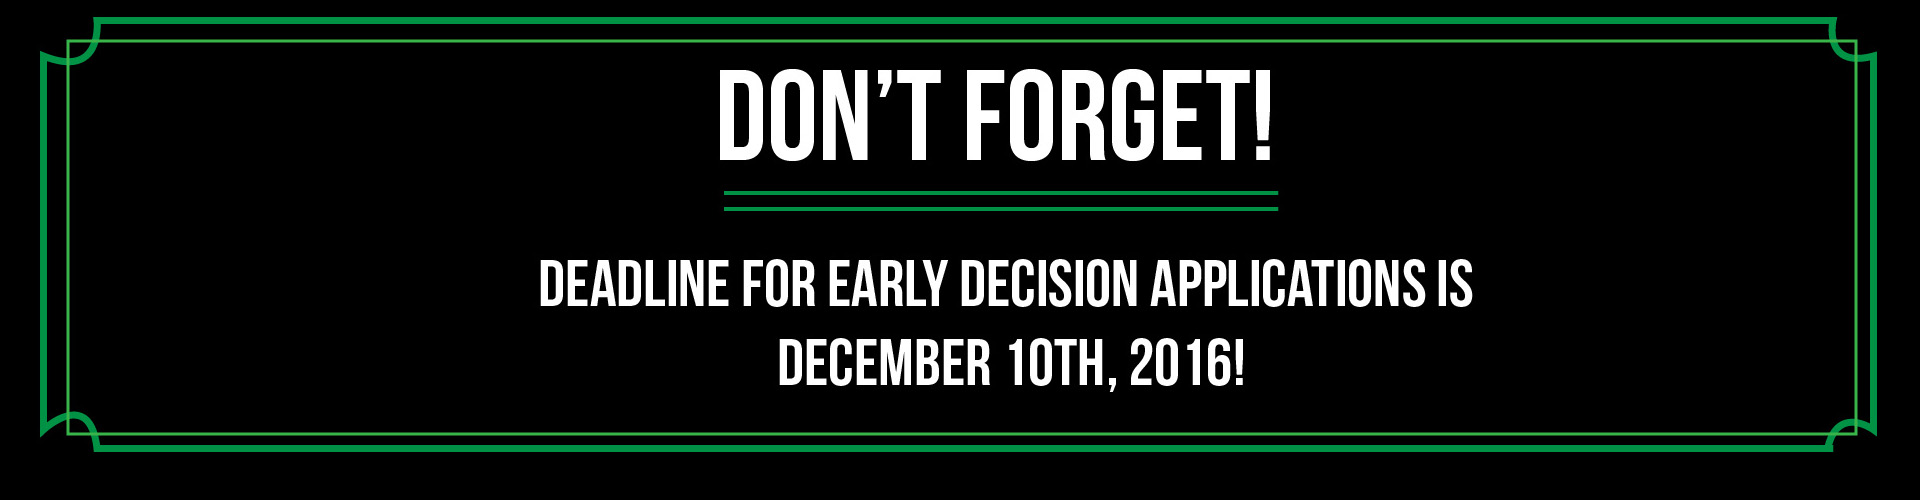 2016 Early Decision Deadline